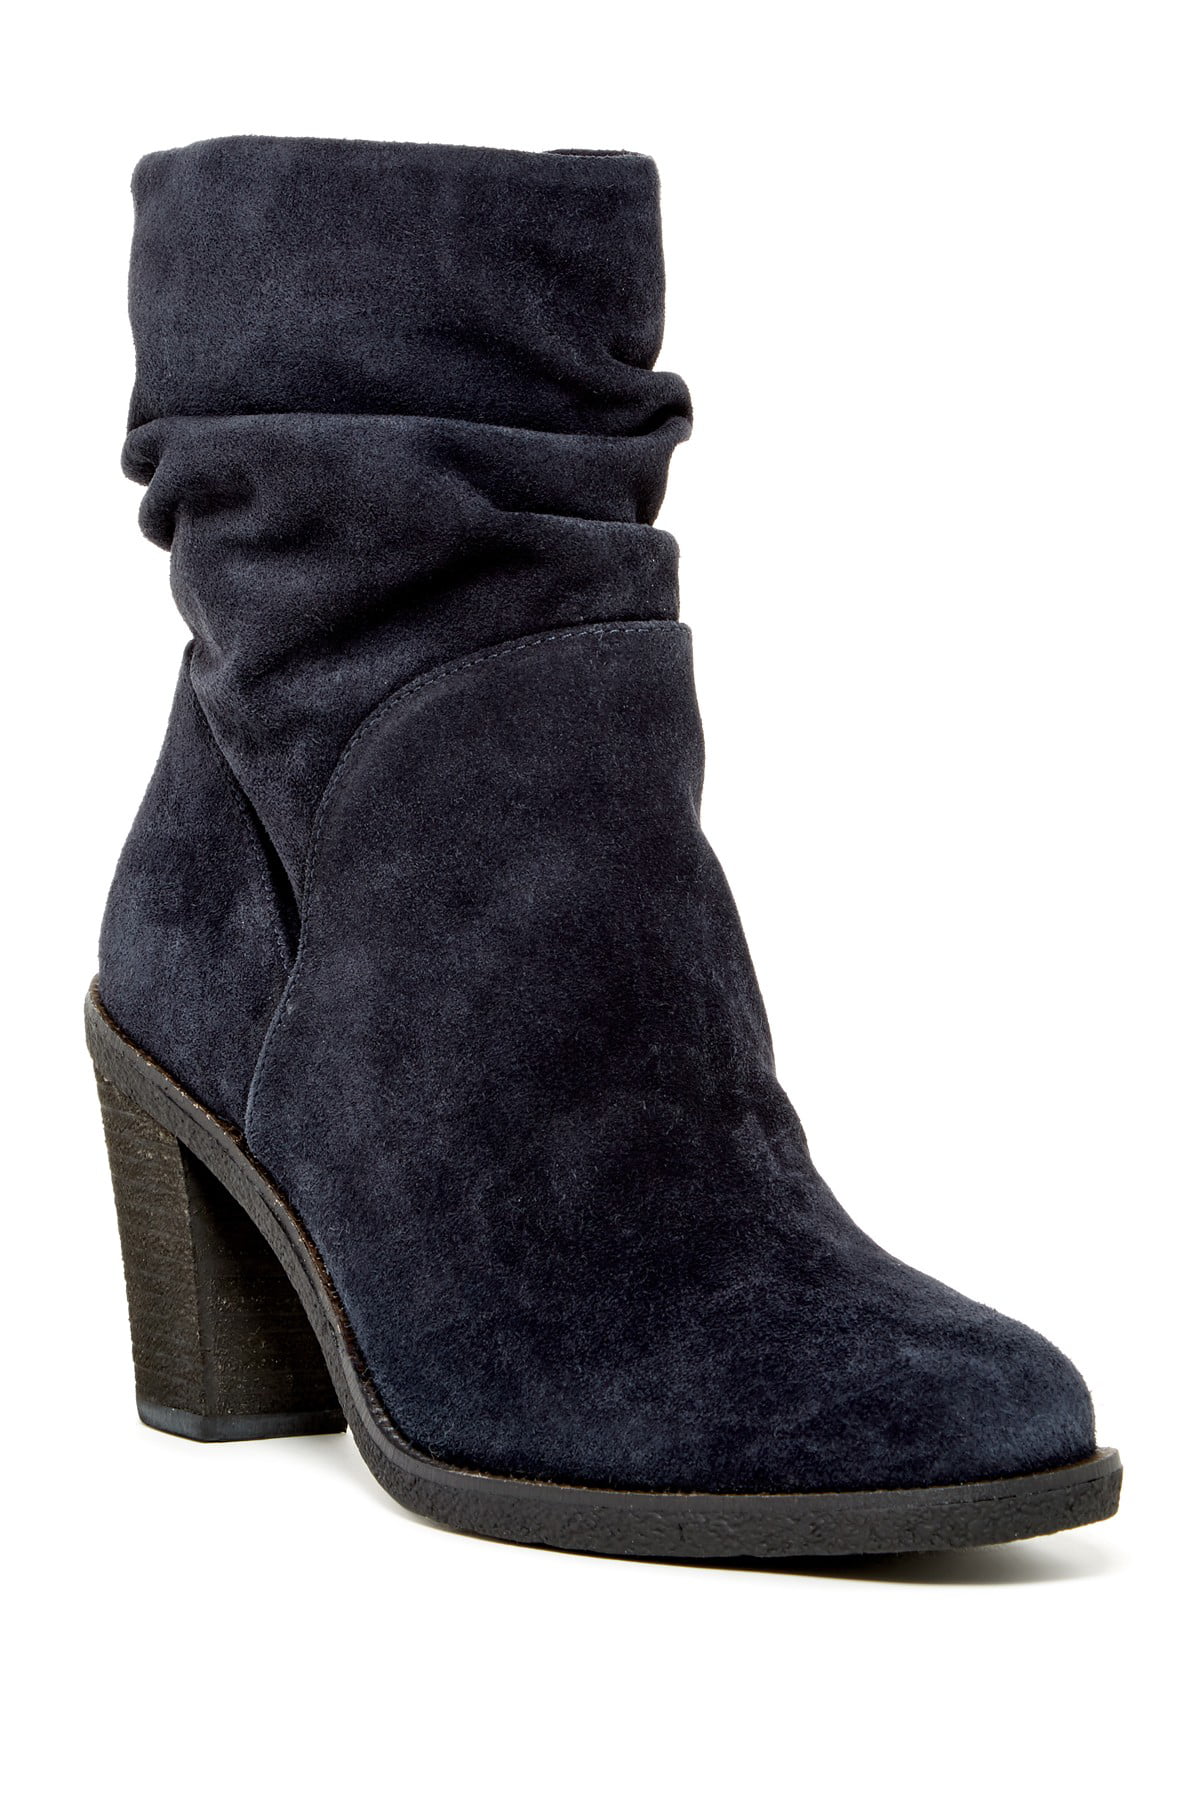 vince camuto slouch boots